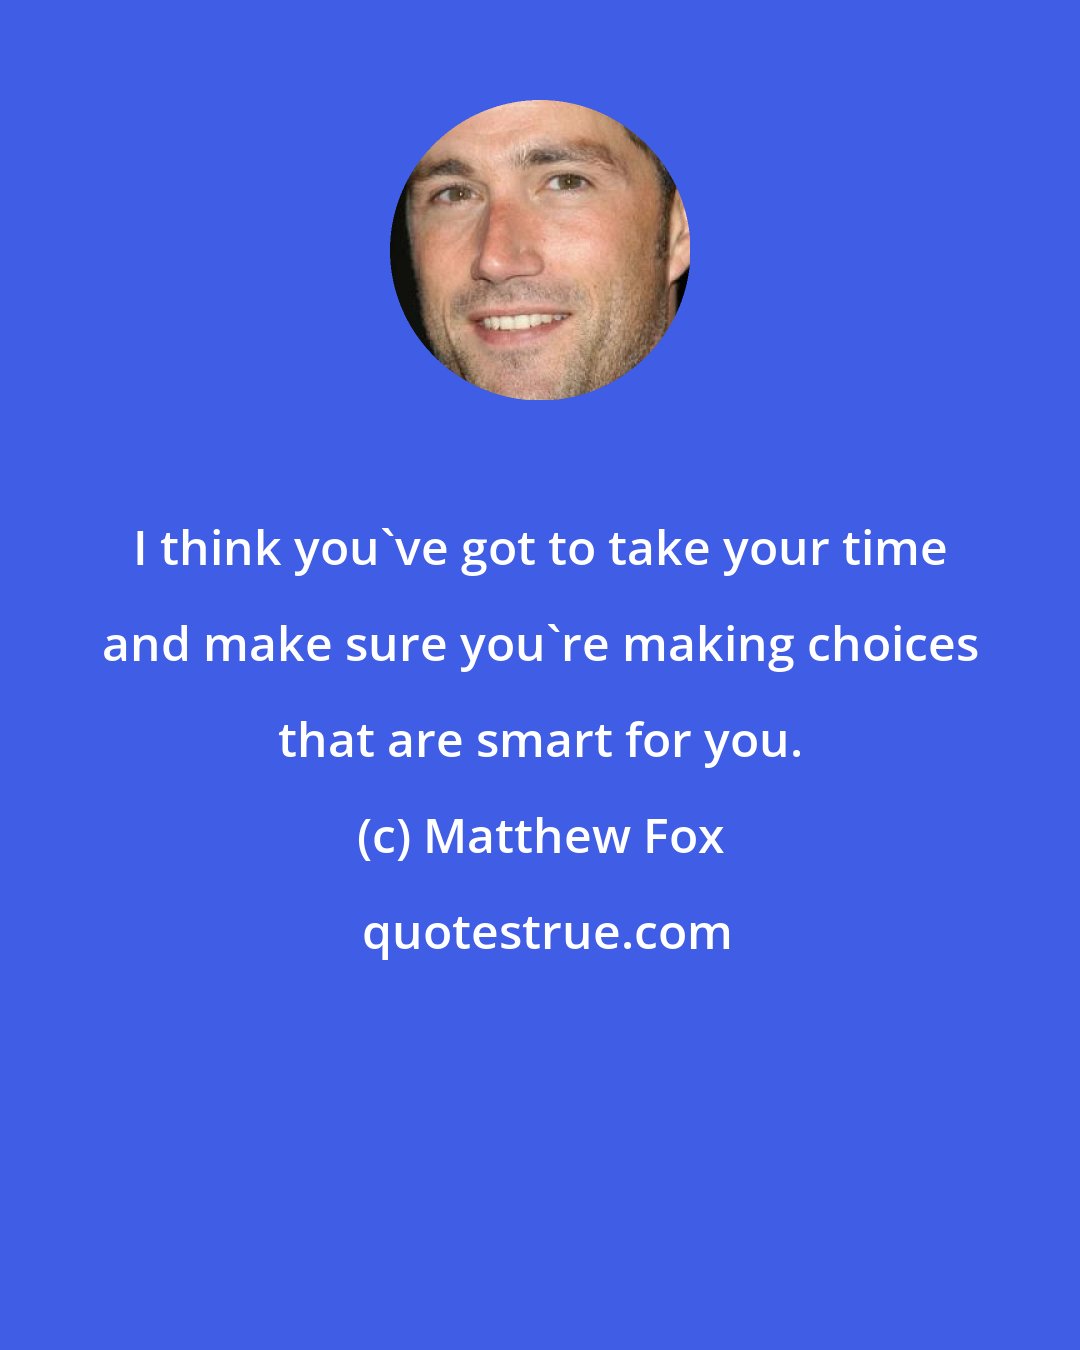 Matthew Fox: I think you've got to take your time and make sure you're making choices that are smart for you.